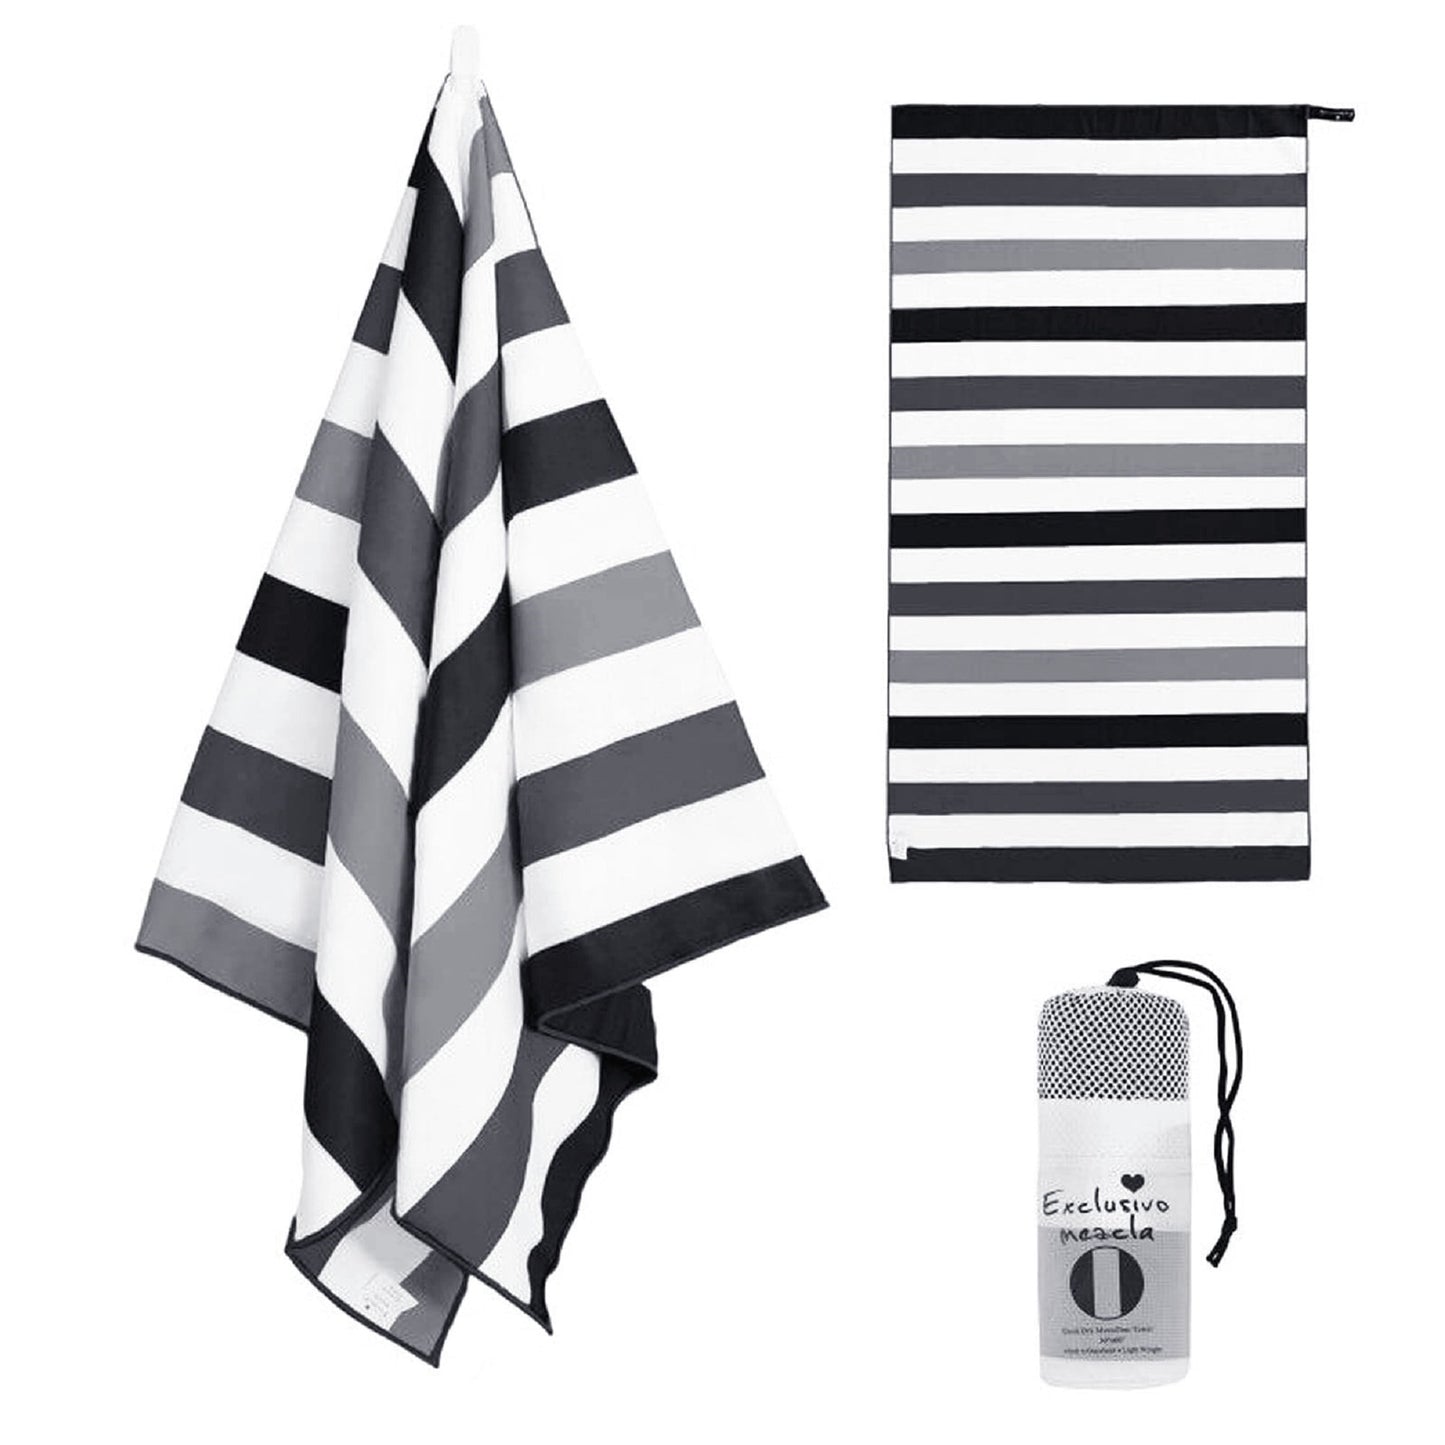 Exclusivo Mezcla Microfiber Quick Dry Beach Towel, Oversized Sand Free Beach Towel for Travel/ Camping/ Sports (Striped Black, 35"X70") - Super Absorbent, Compact and Lightweight